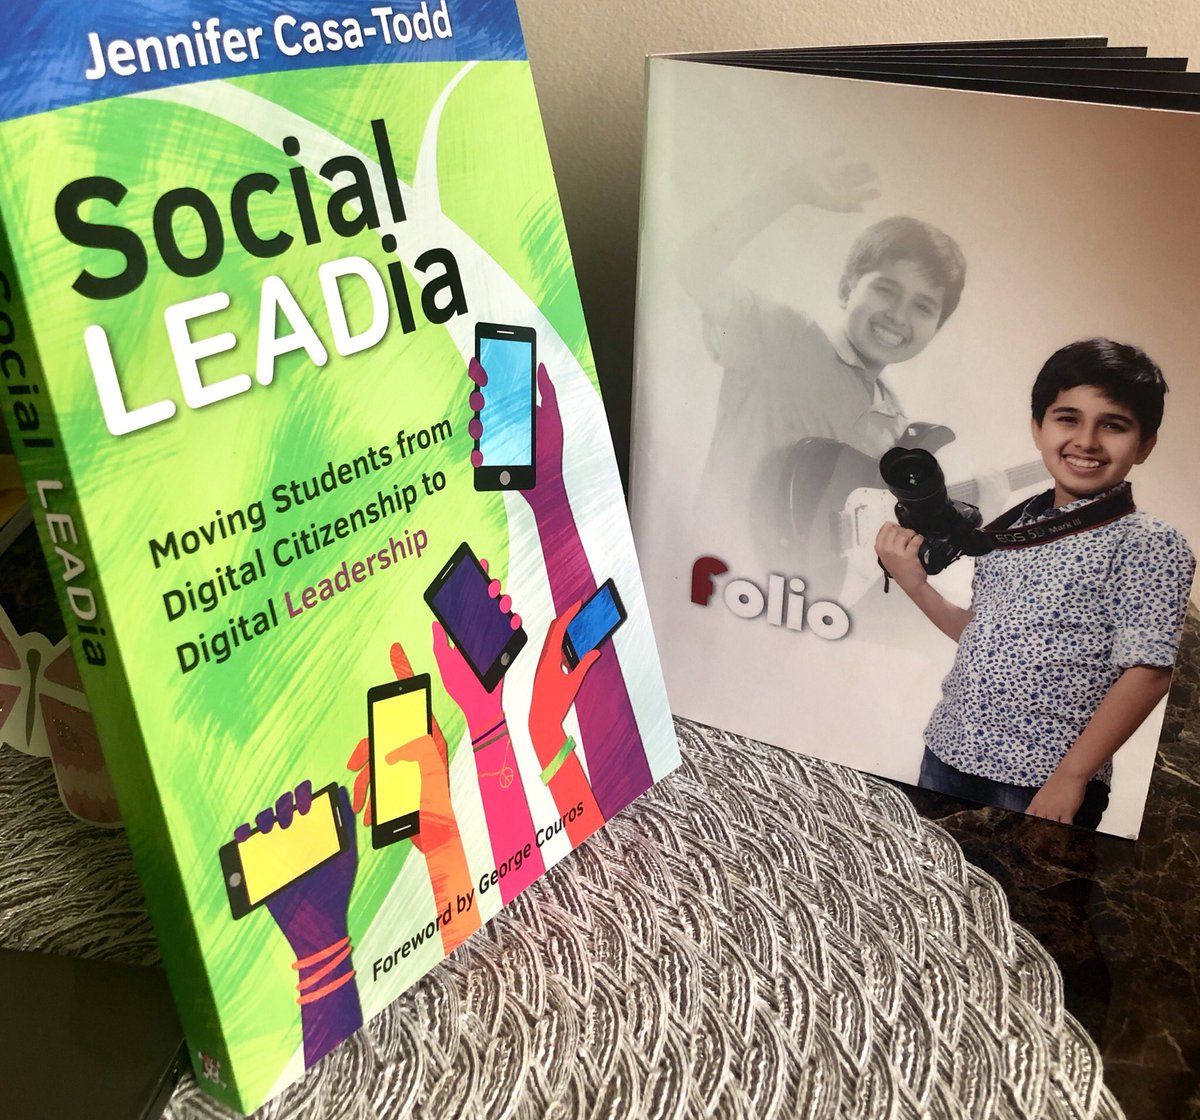 #BookTime with #socialLEADia Weekend reading with #Digcitkids -  @Ayushchopra24 and @WonderAnanya - From Digital Citizenship to Digital Leadership. Thanks for the gift dear @JCasaTodd Loved the gesture 💝